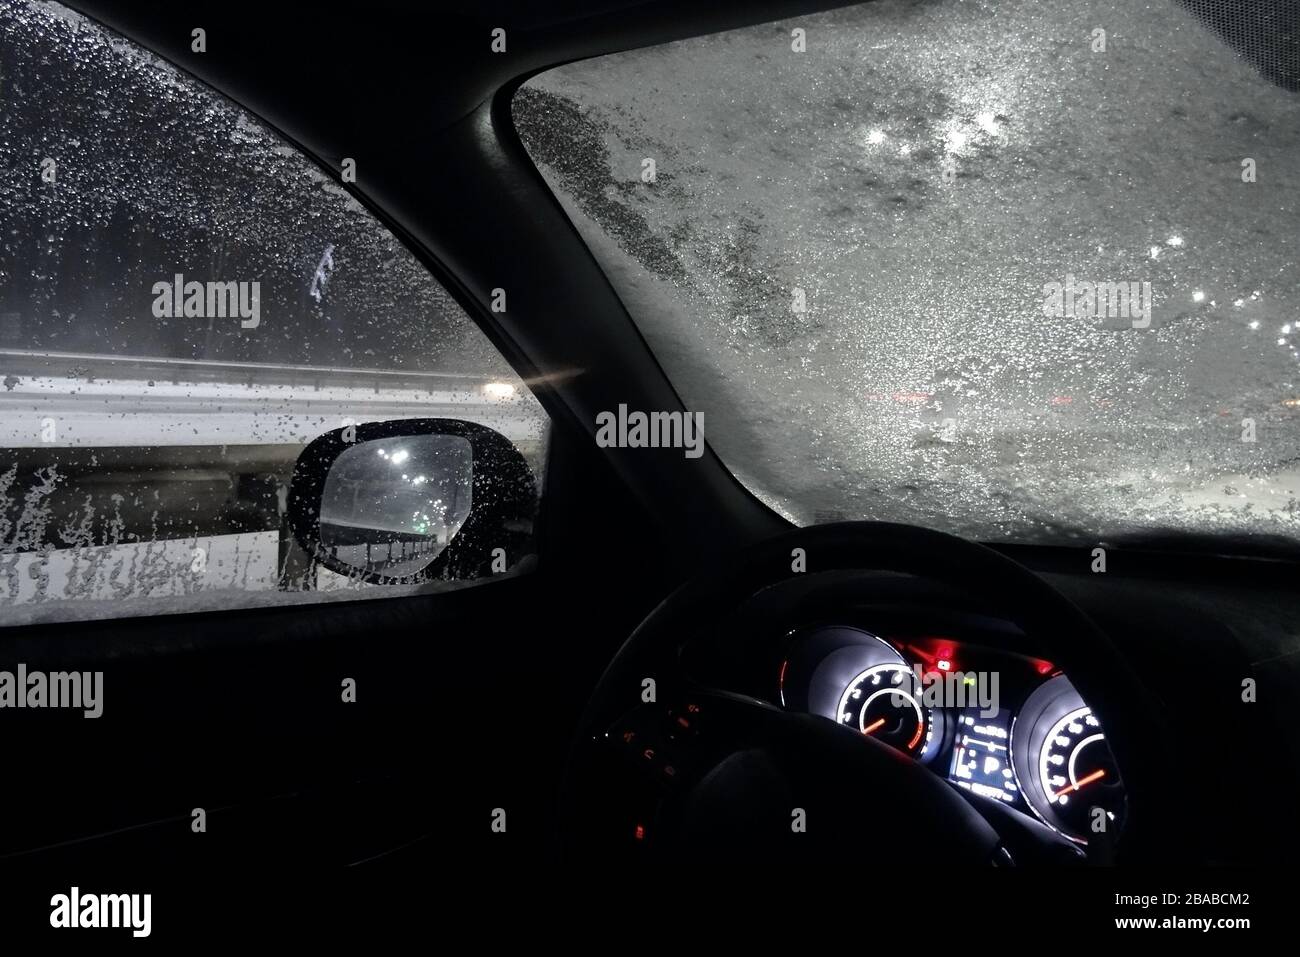 Ice And Snow On The Frozen Windshield Of Car On The Night Road Stock Photo